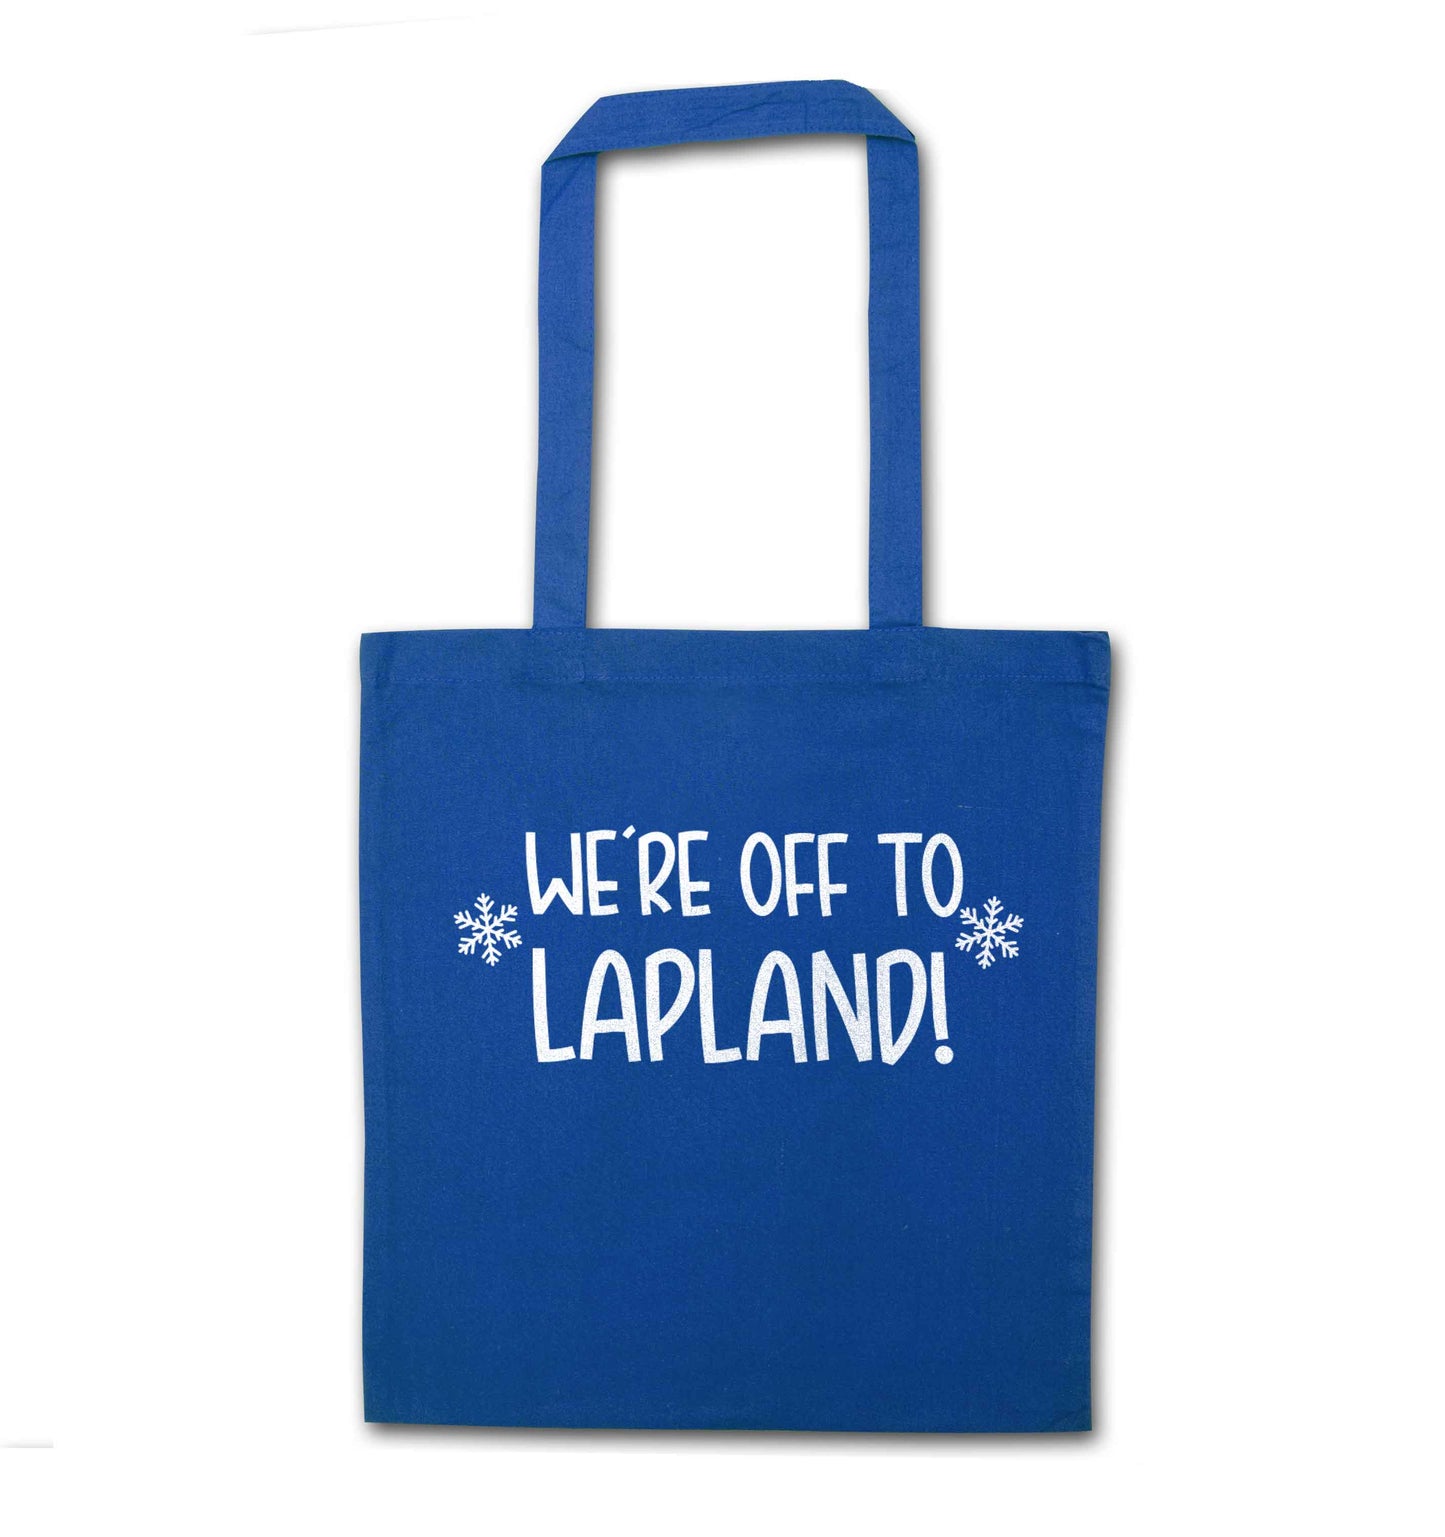 We're off to Lapland blue tote bag